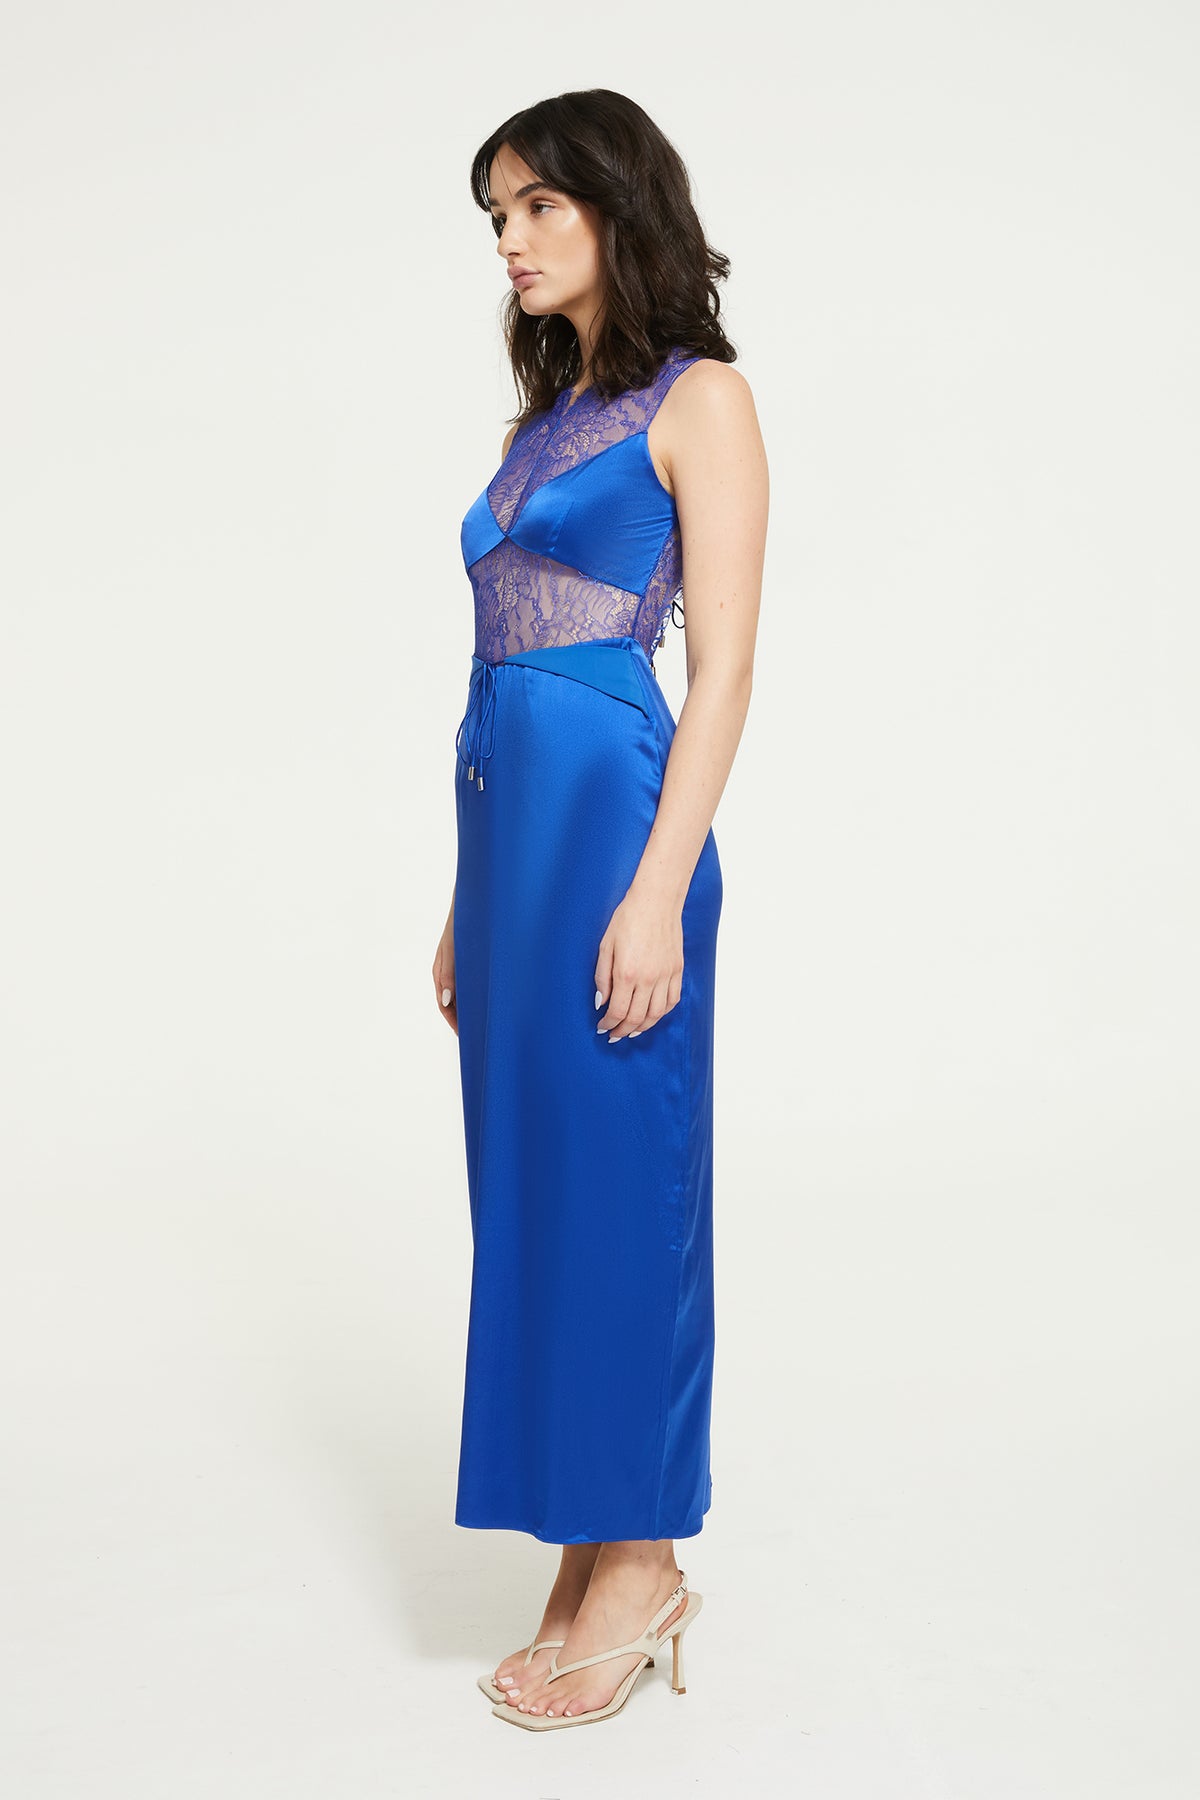 The Amour Midi Dress in Ultra Blue from Ginia RTW